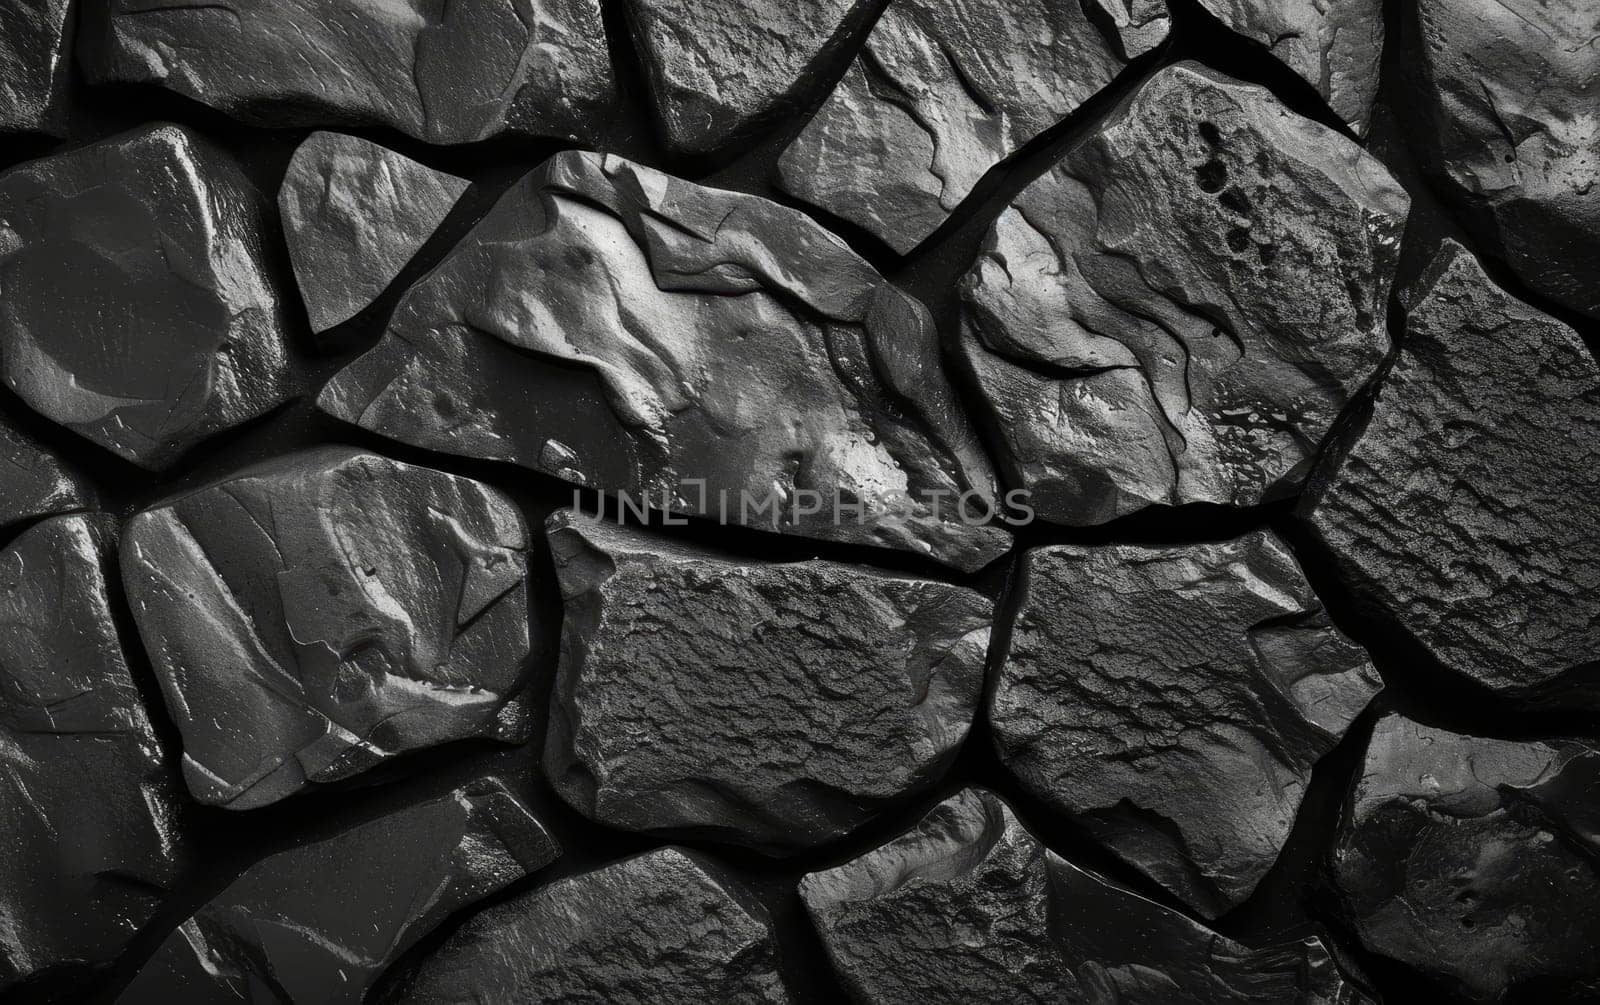 Close-up view of a pile of coal with a rough, irregular shape and texture. by sfinks